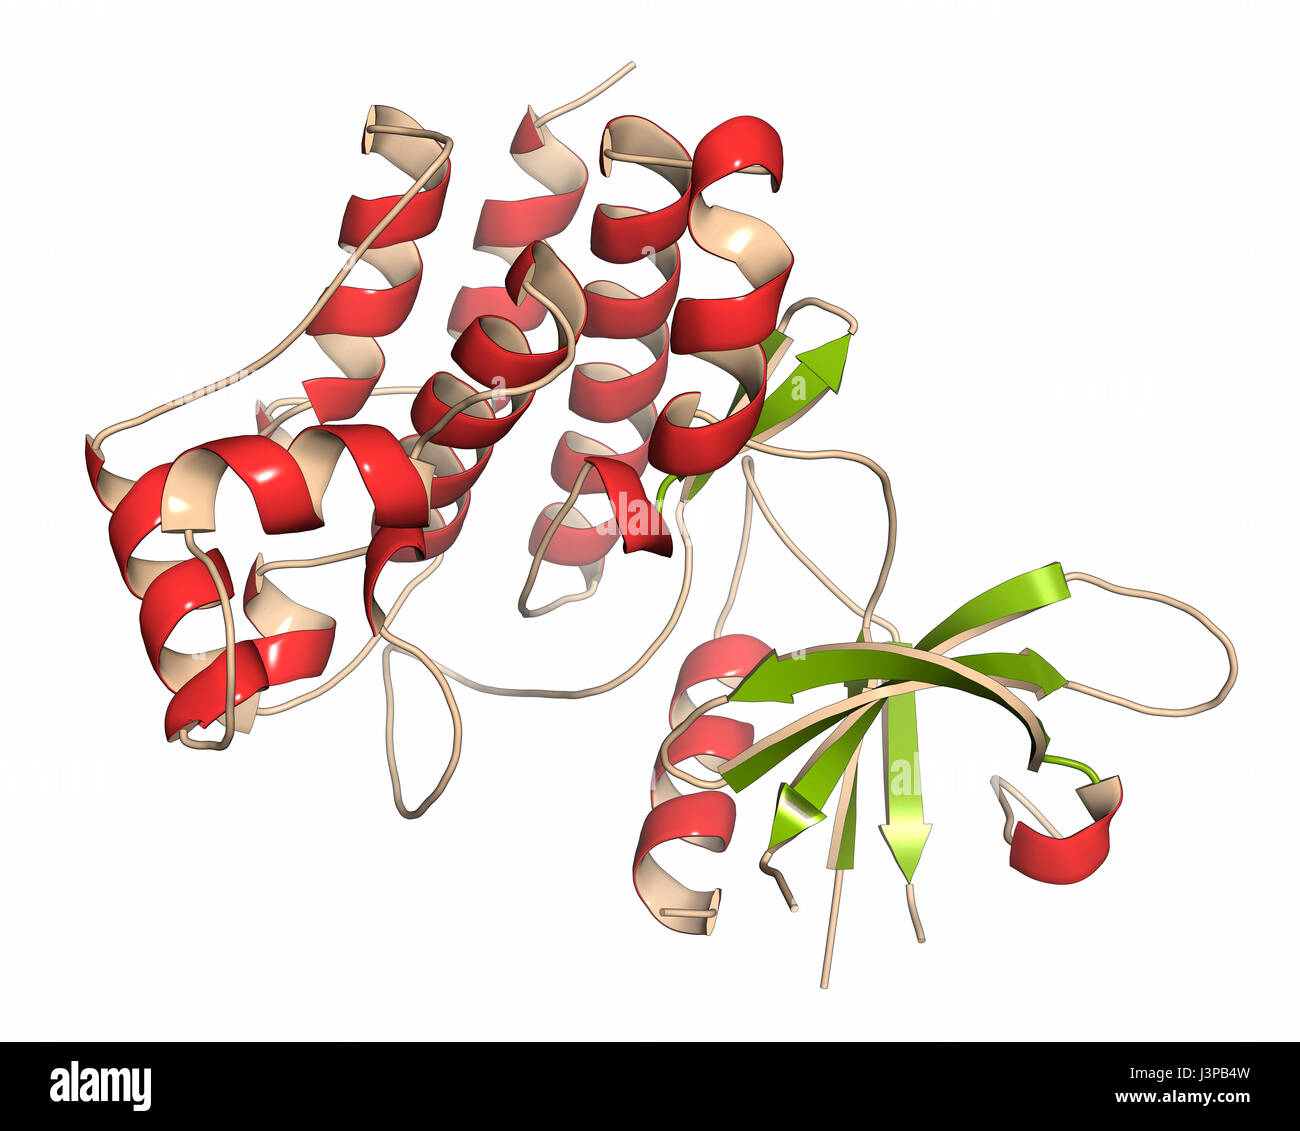 Janus kinase 1 protein. Part of JAK-STAT signalling pathway and drug target. Cartoon representation. Secondary structure coloring. Stock Photo